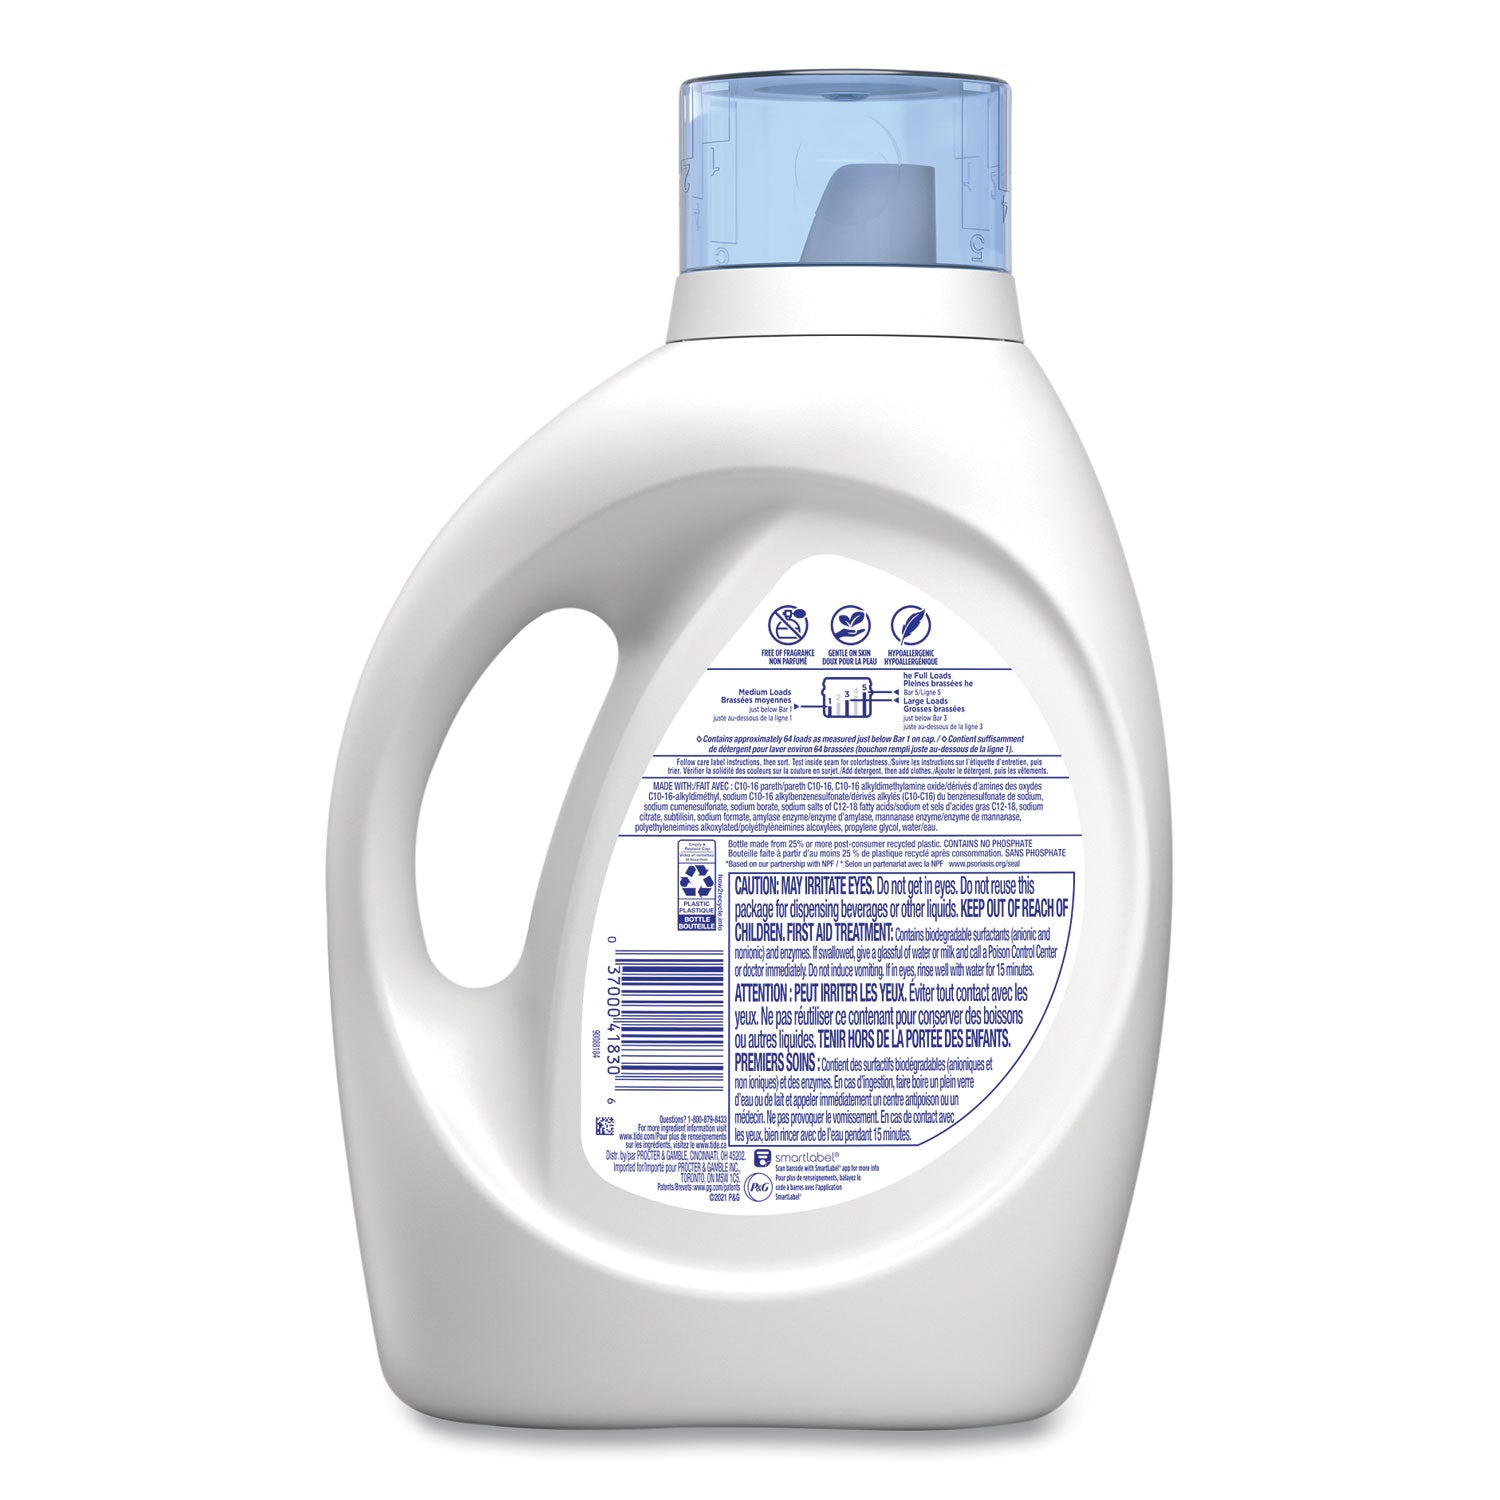 free-and-gentle-liquid-laundry-detergent-unscented-92-oz-bottle_pgc48871 - 3